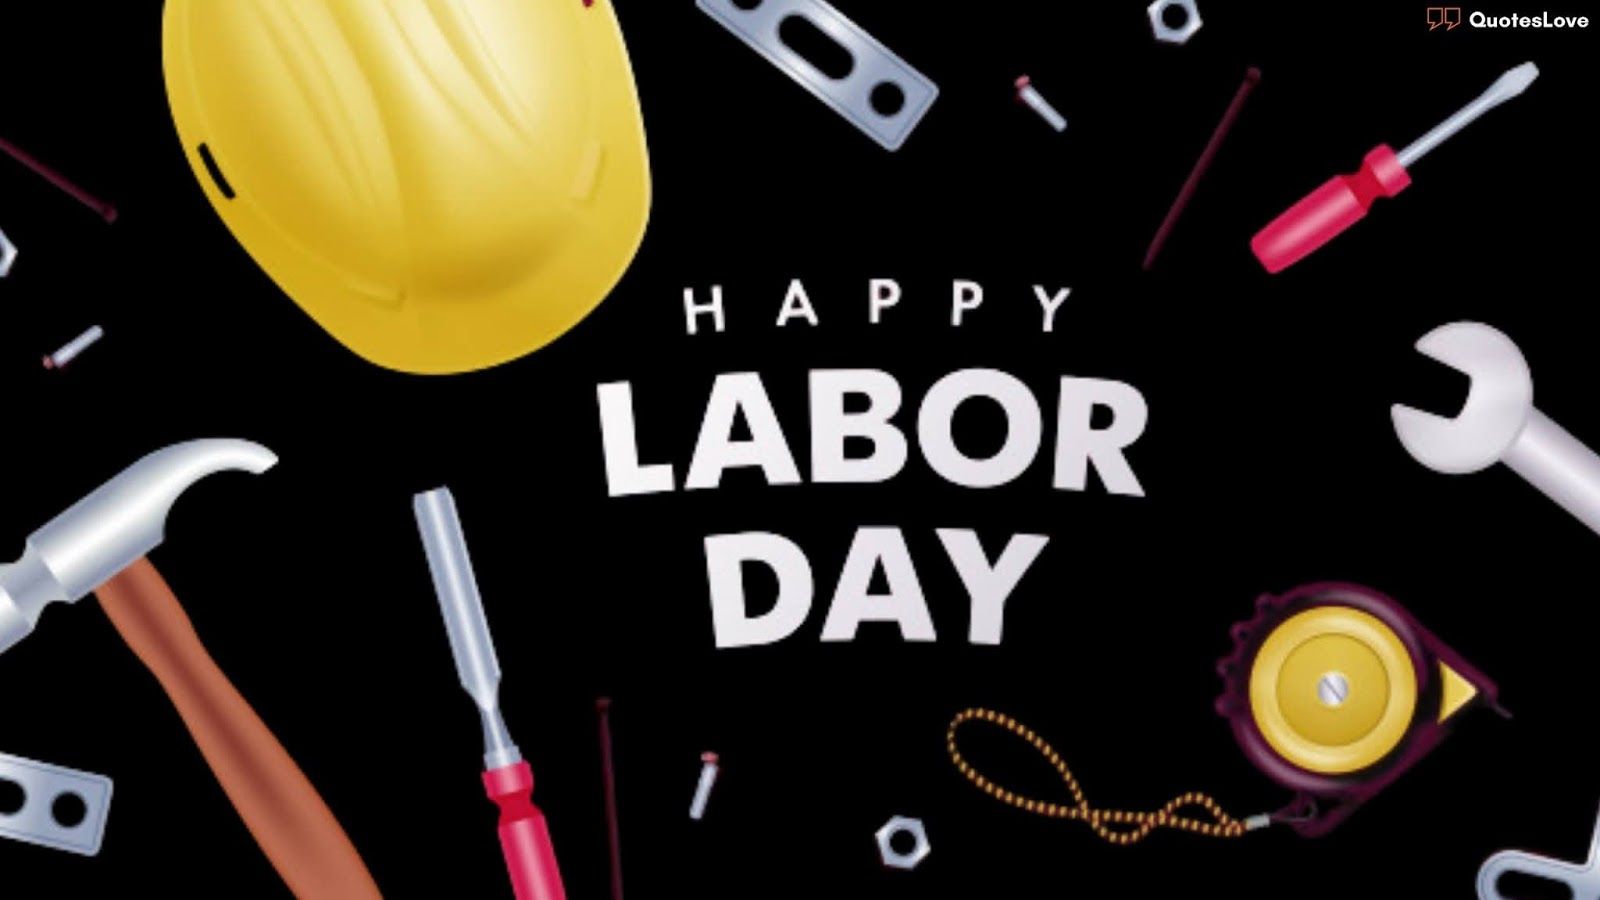 [Best] Labor Day 2020: Wishes, Greetings, Messages, Image, Picture, Poster, Wallpaper